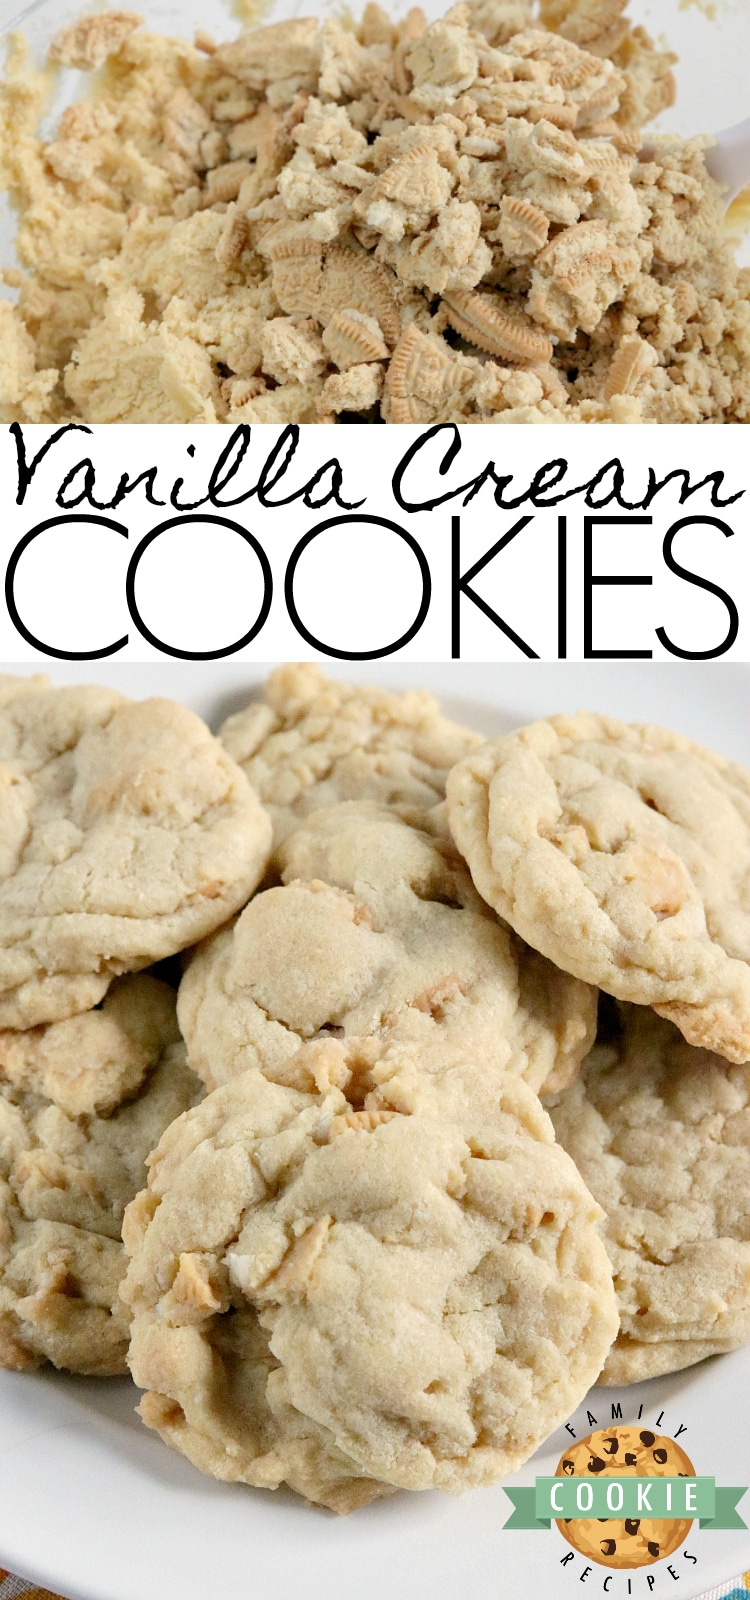 Vanilla Cream Cookies are soft, chewy and full of vanilla flavor. This simple cookie recipe is made with vanilla pudding mix and lots of crushed Golden Oreos - they are amazing! via @buttergirls